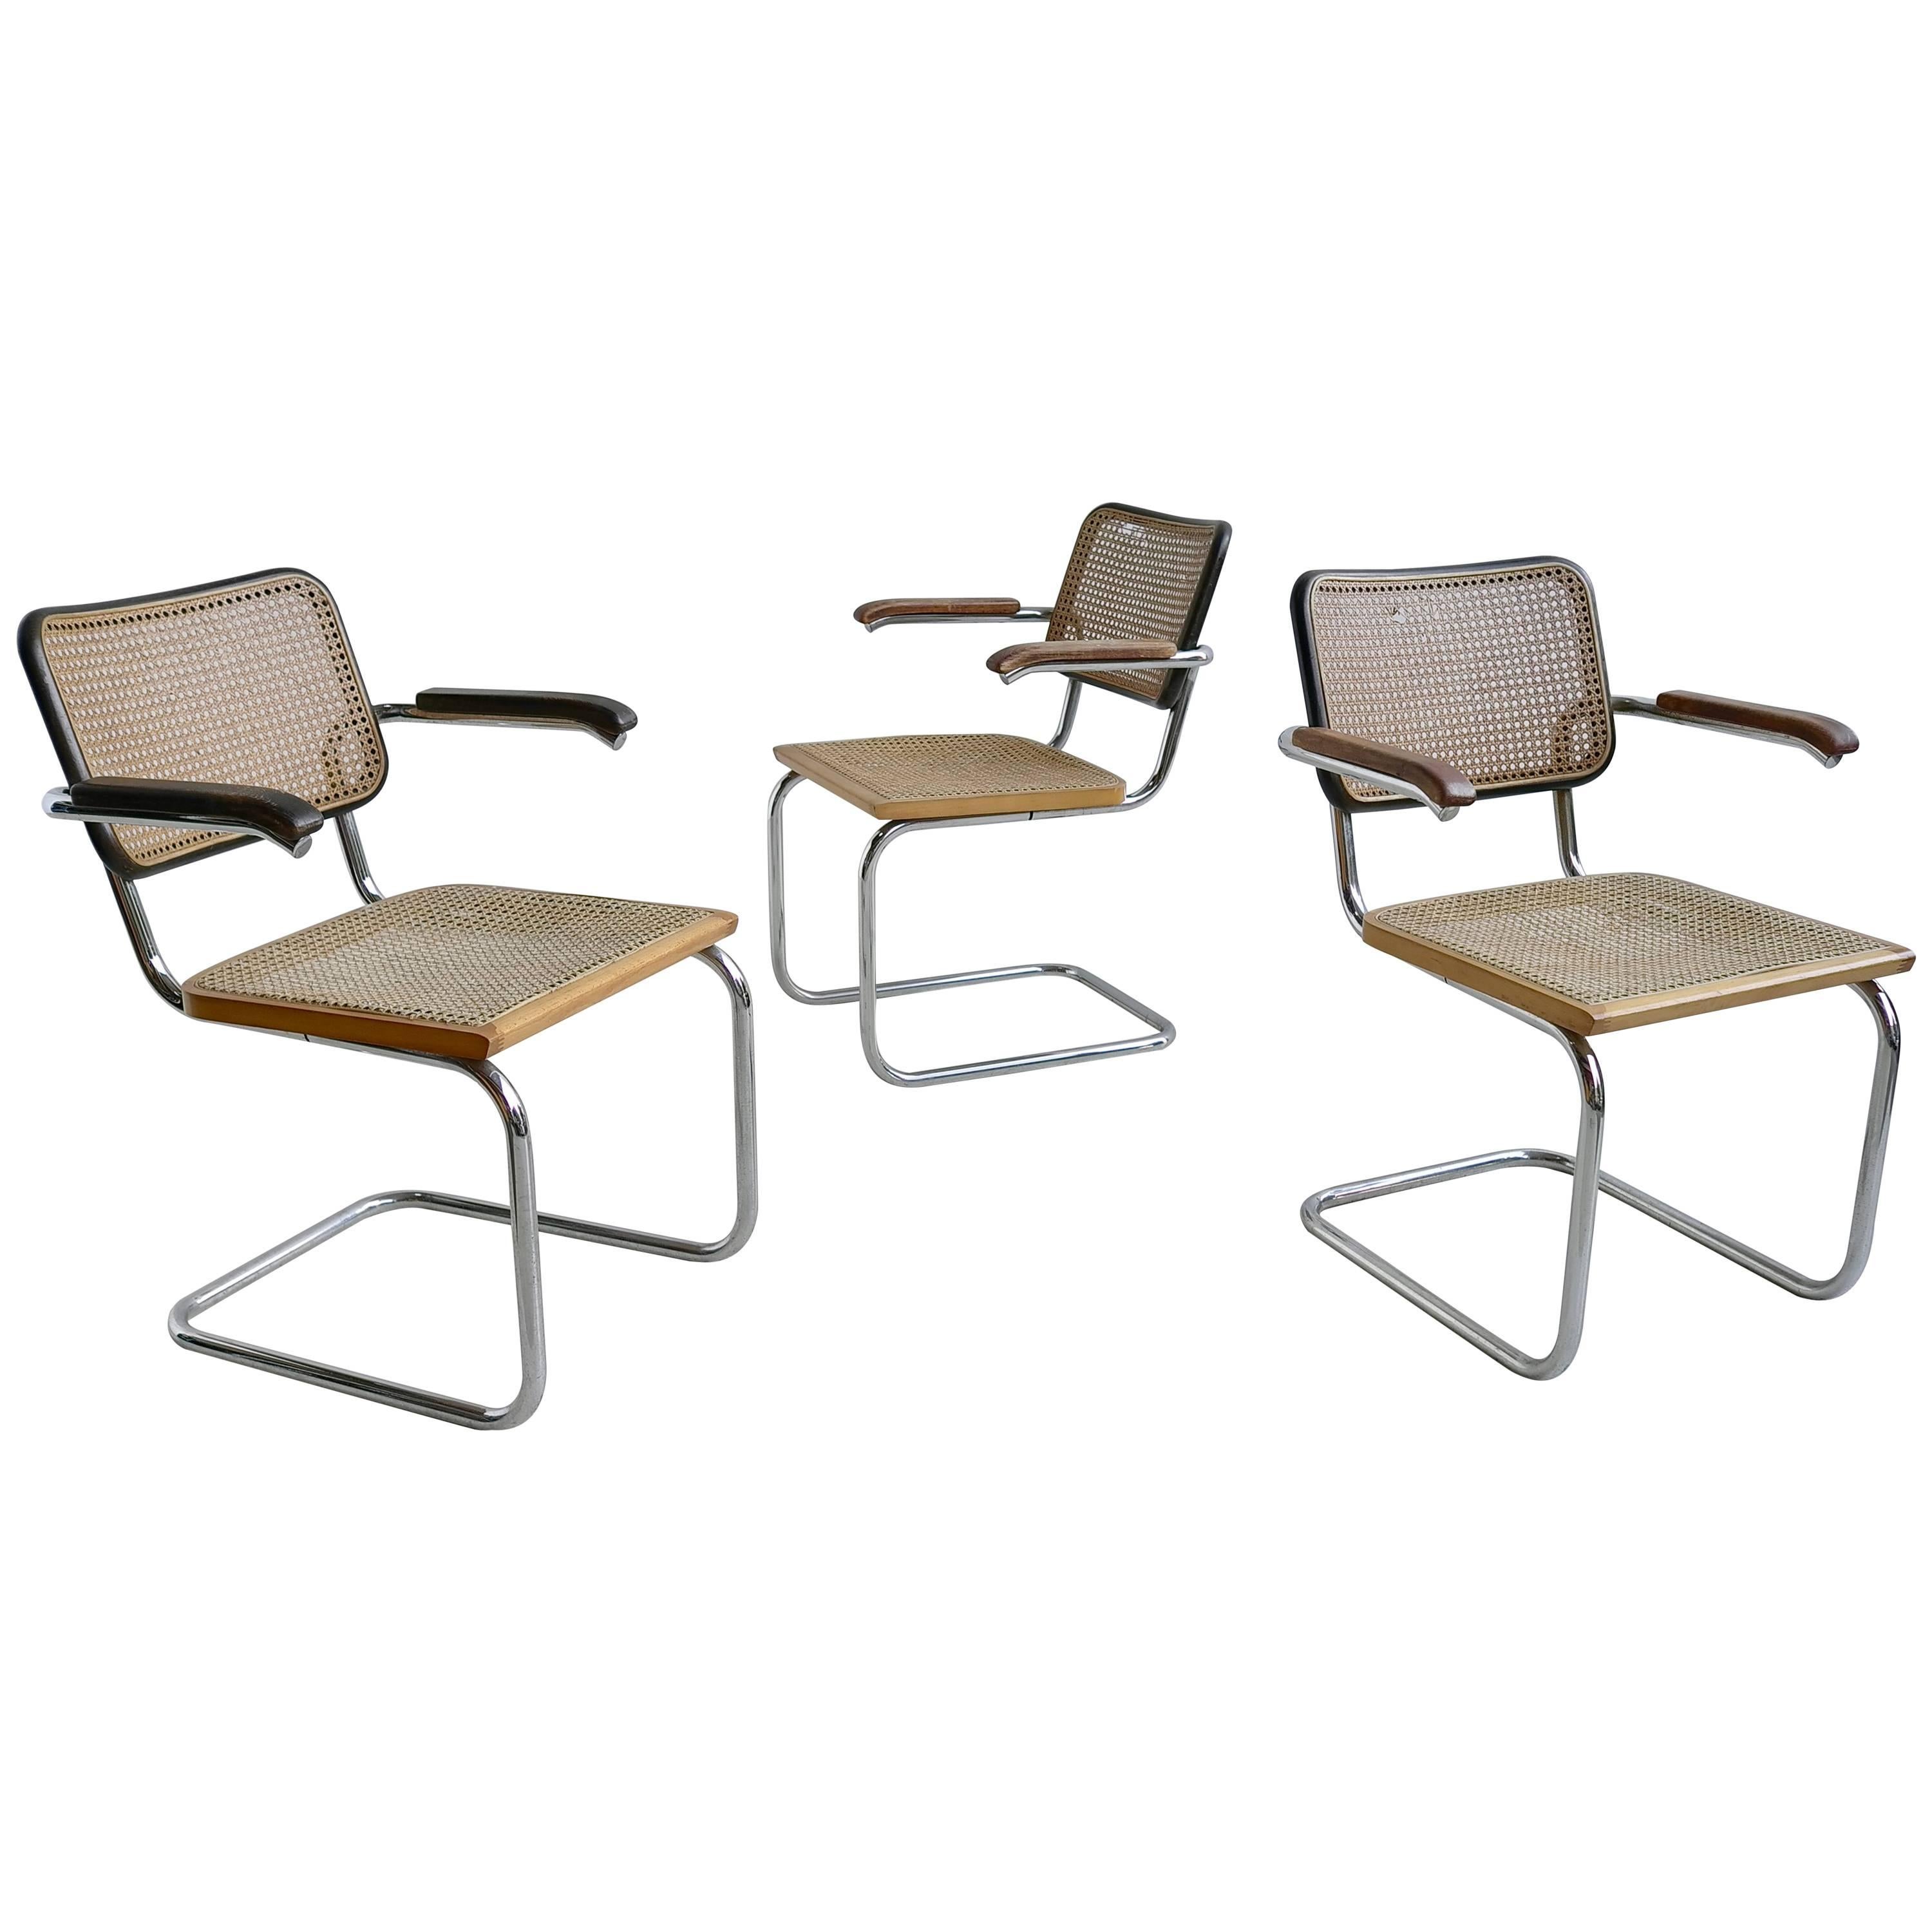 Marcel Breuer S64 Chairs by Thonet Early Editions